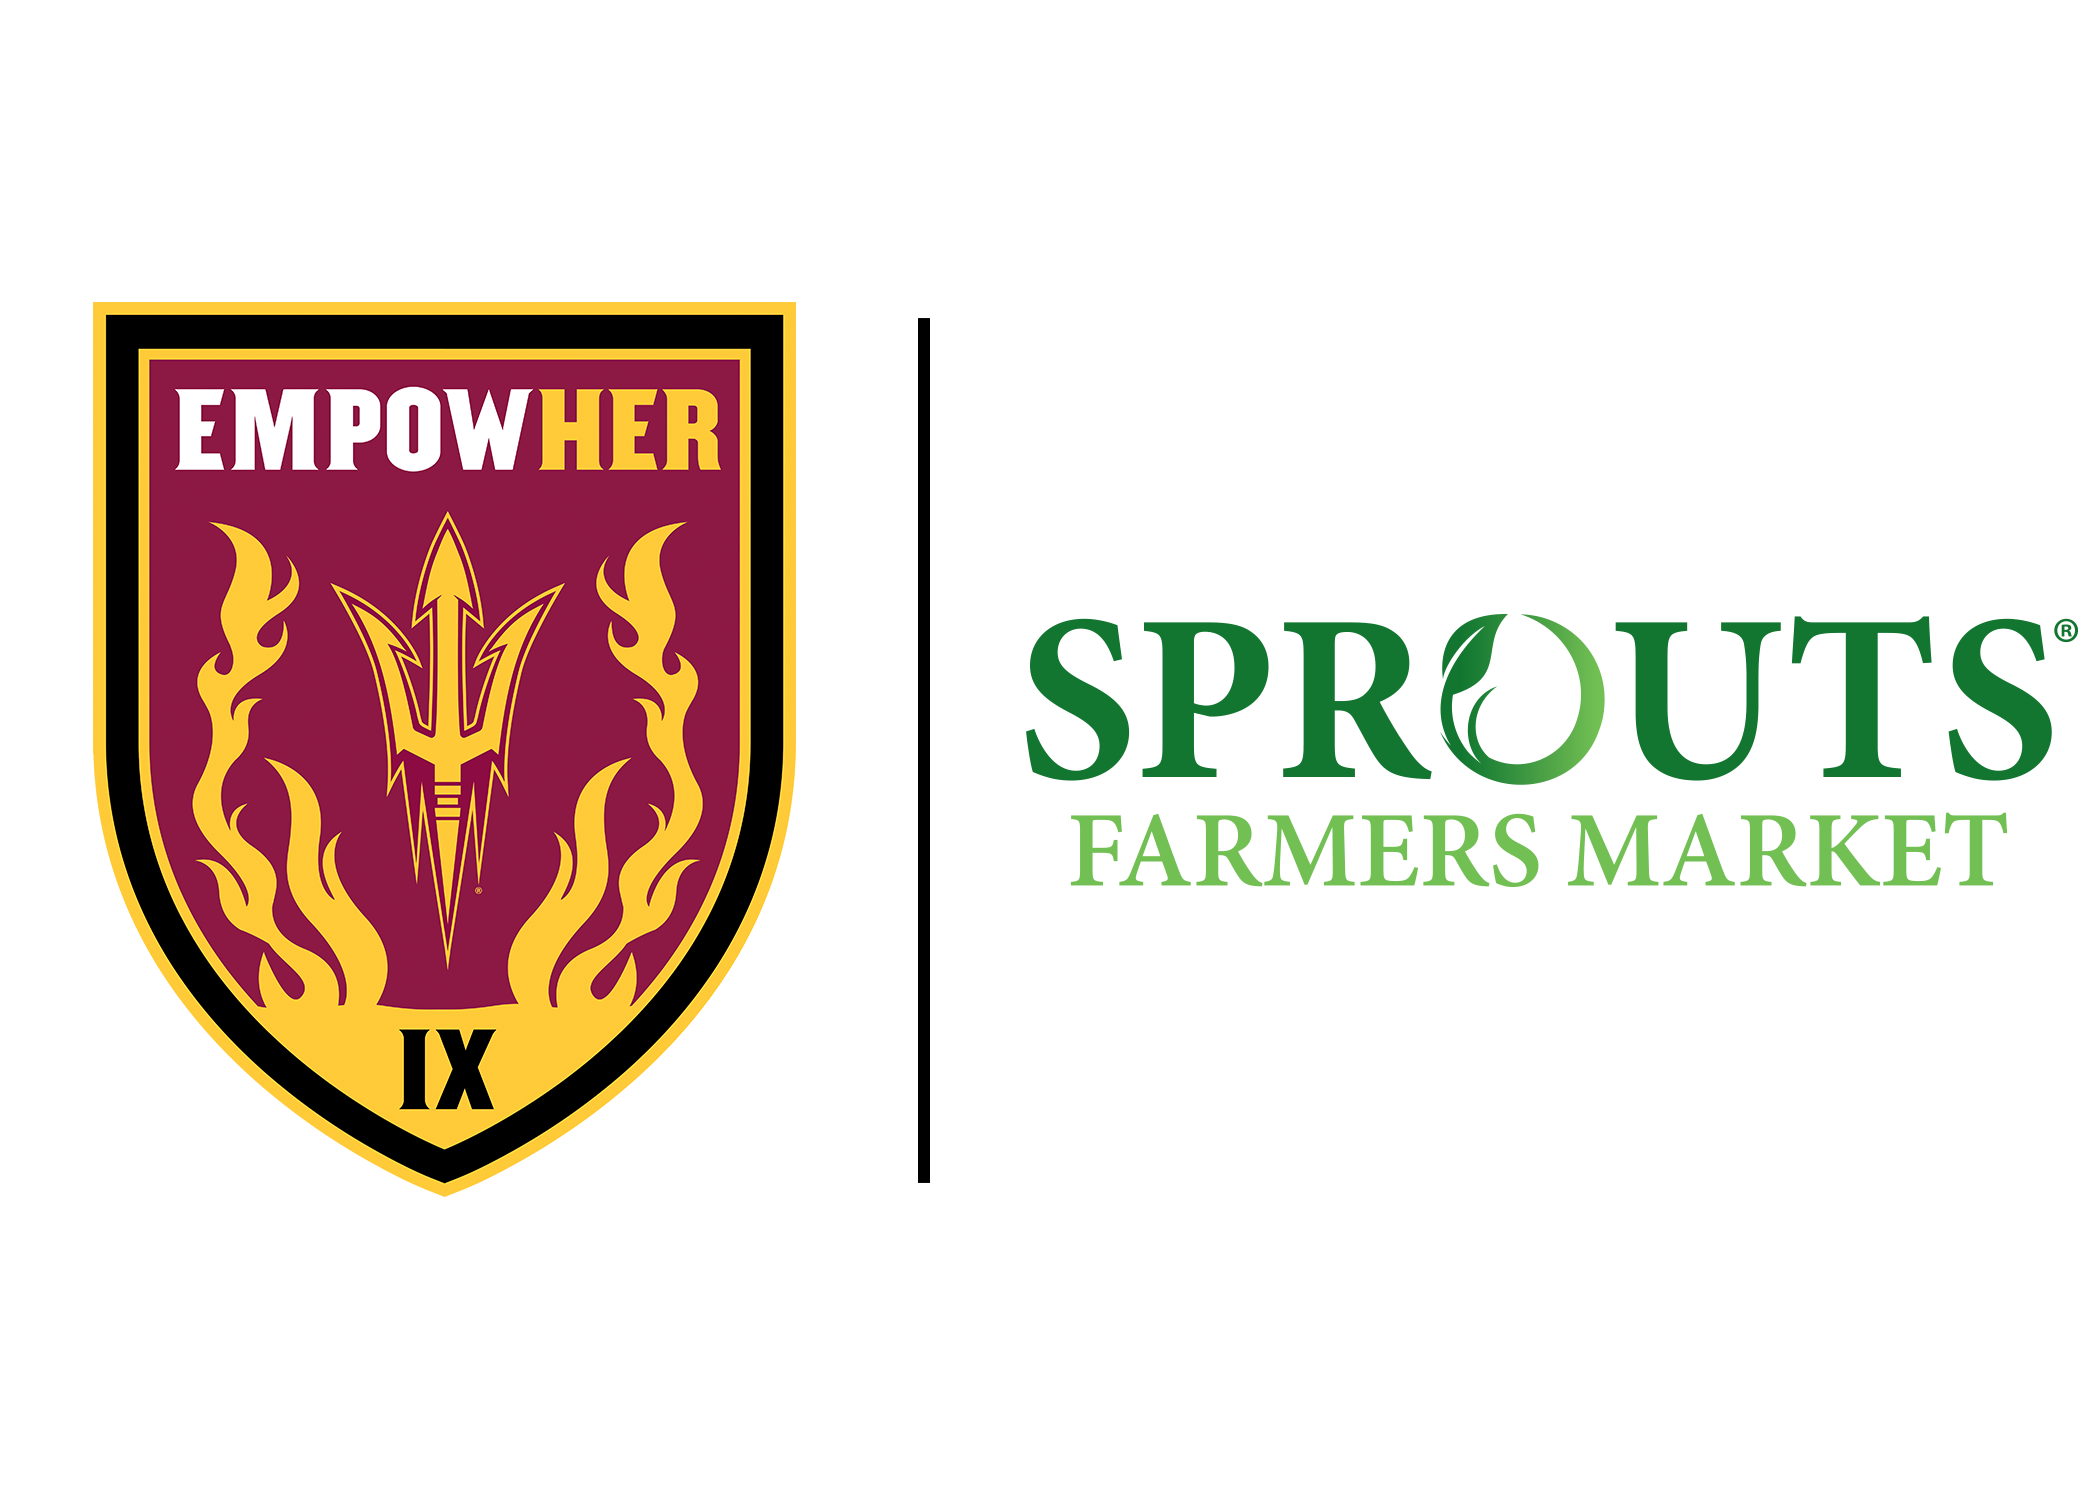 EmpowHer-Sprouts